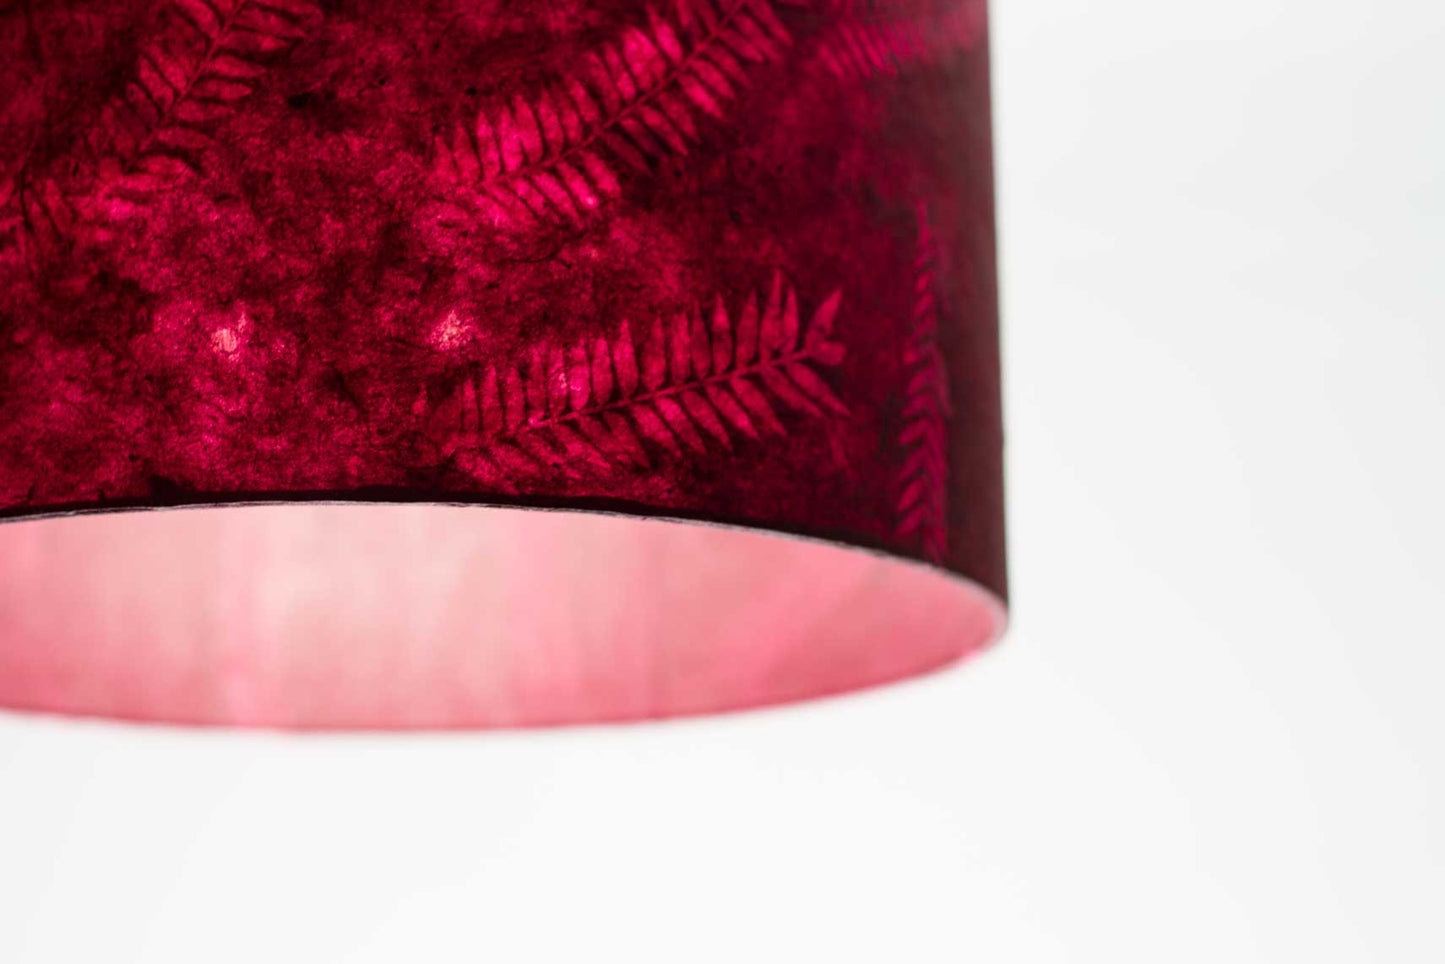 Square Lamp Shade - P25 - Resistance Dyed Pink Fern, 30cm(w) x 30cm(h) x 30cm(d)